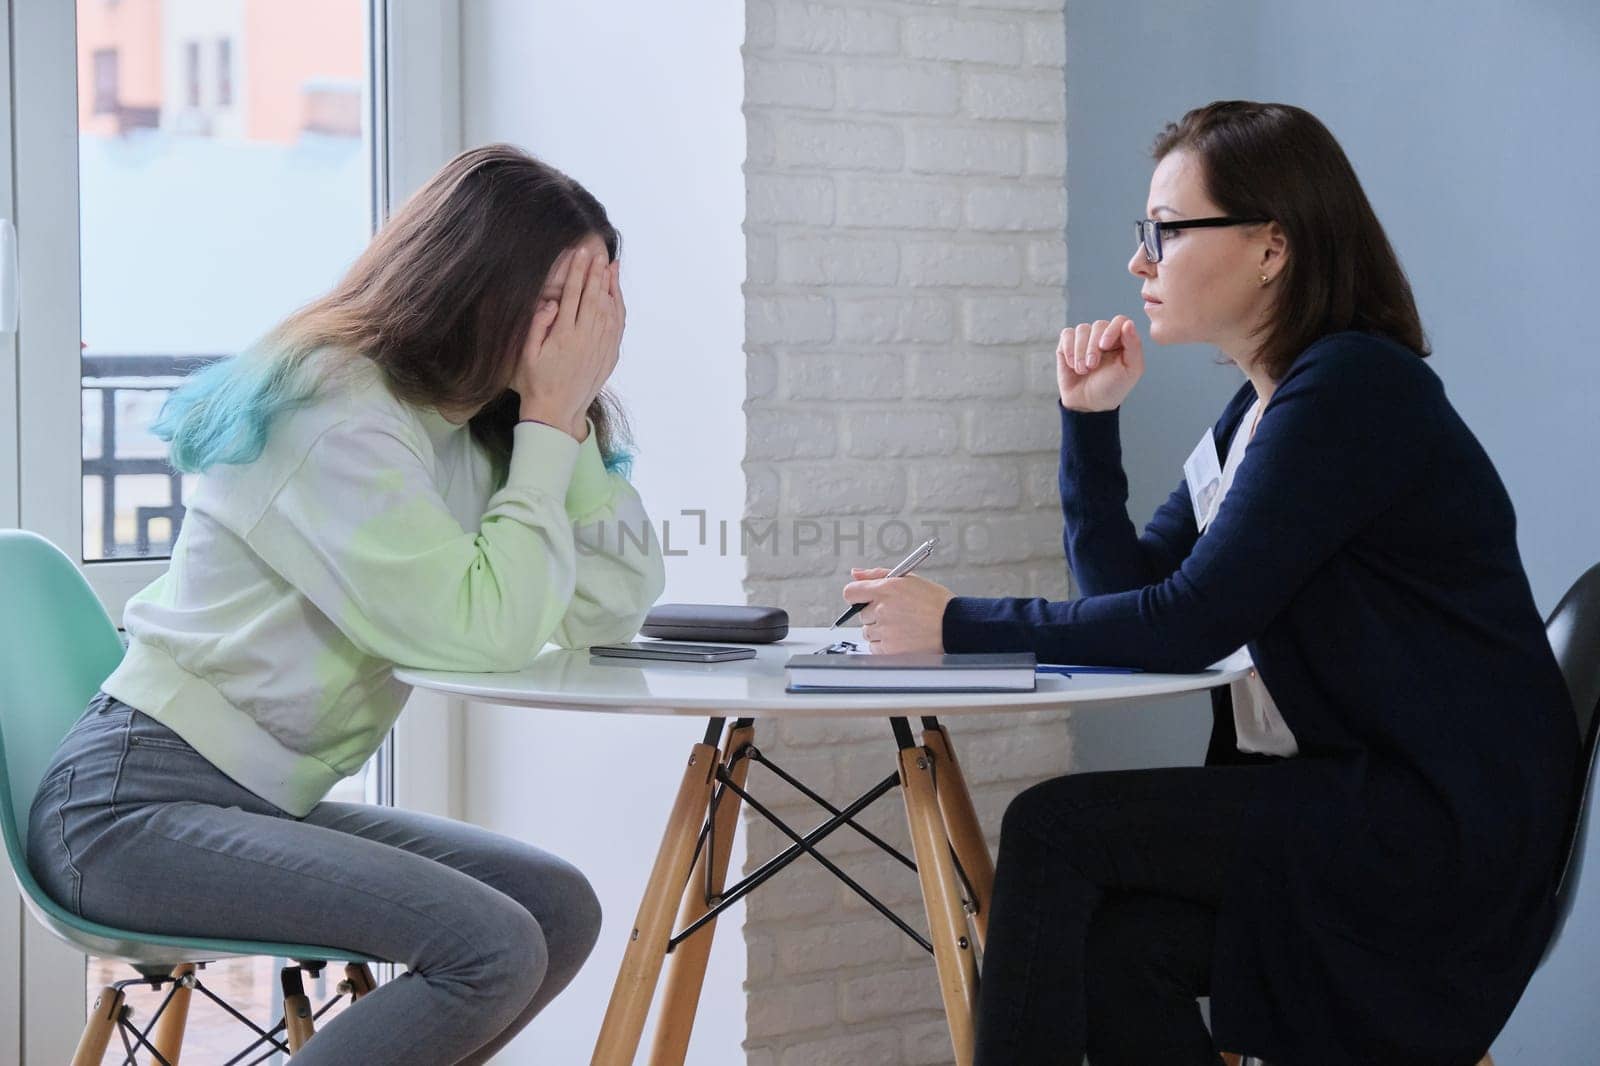 Teen girl covered face with hands at meeting with psychologist. Problems of adolescent children, help of therapist, mental health of young people